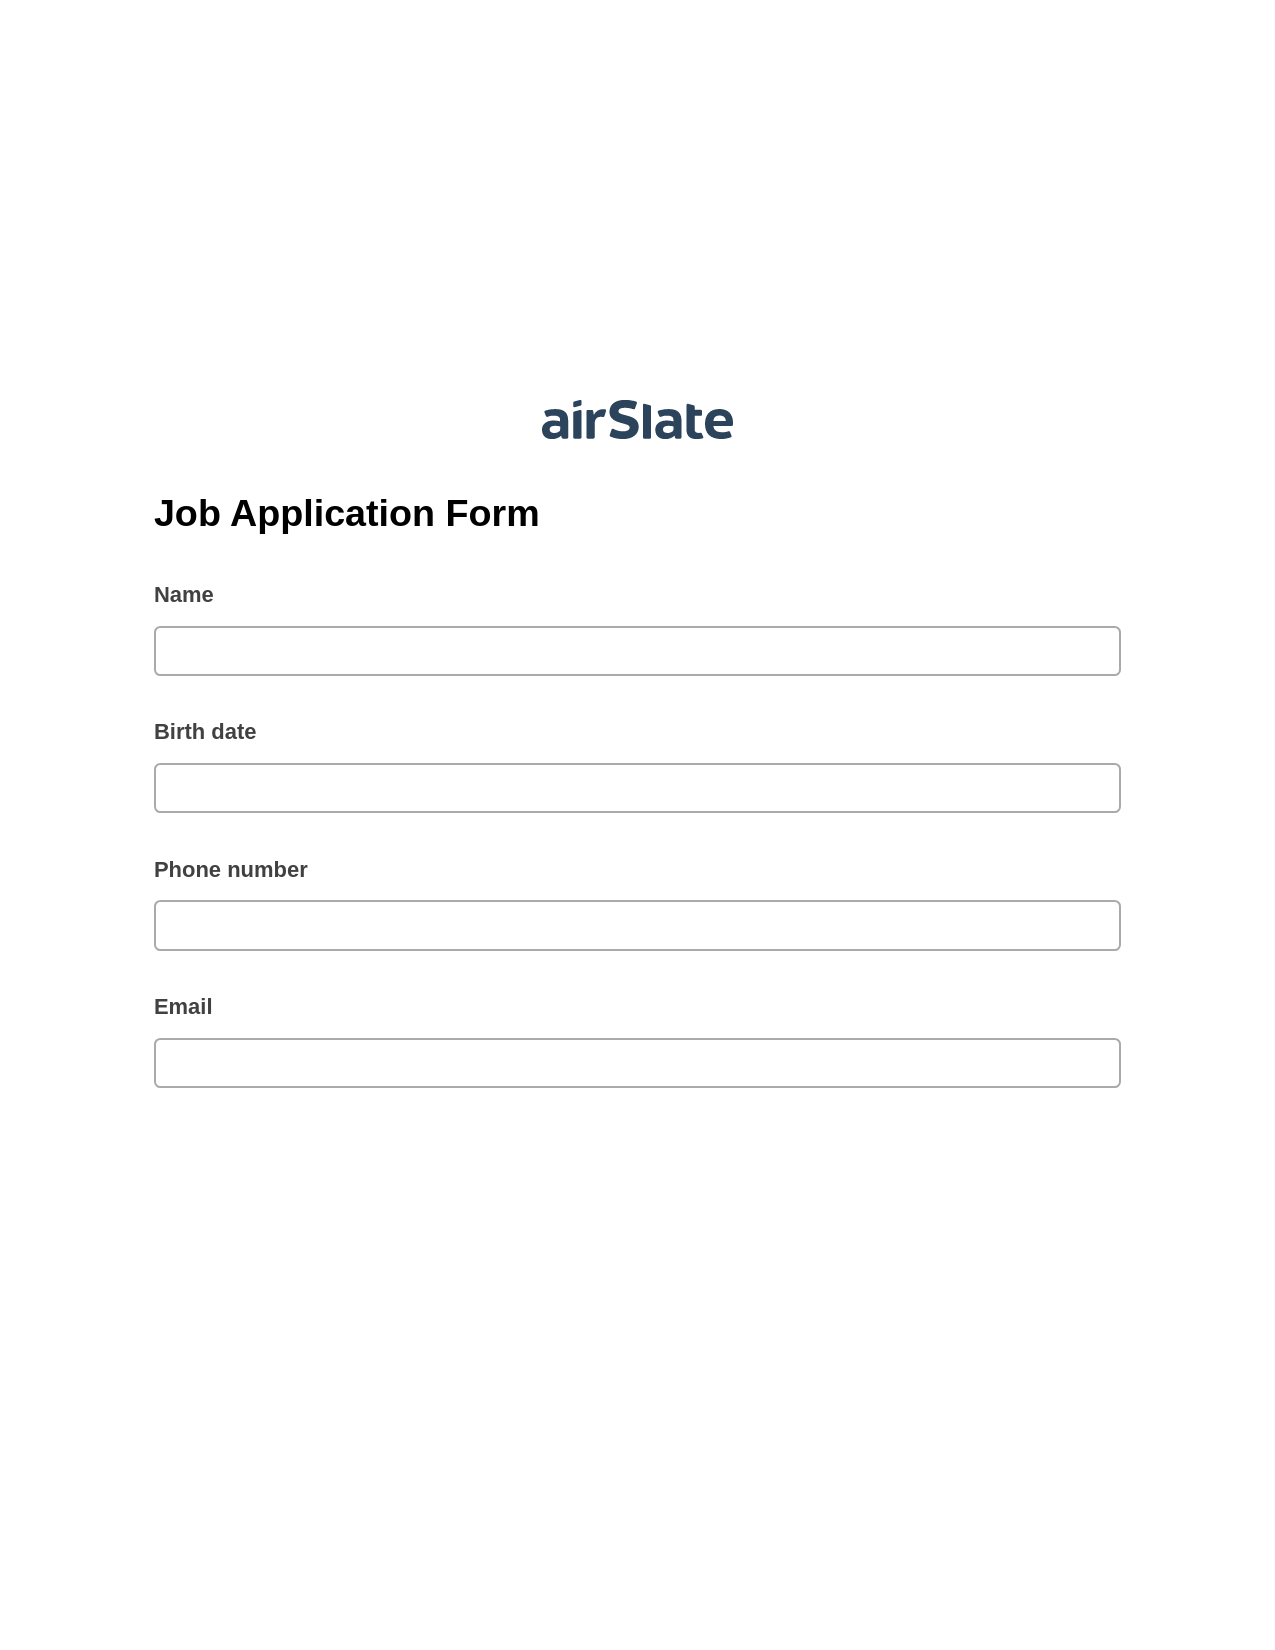 Multirole Job Application Form Pre-fill from Smartsheet Bot, Google Sheet Two-Way Binding Bot, Export to Formstack Documents Bot